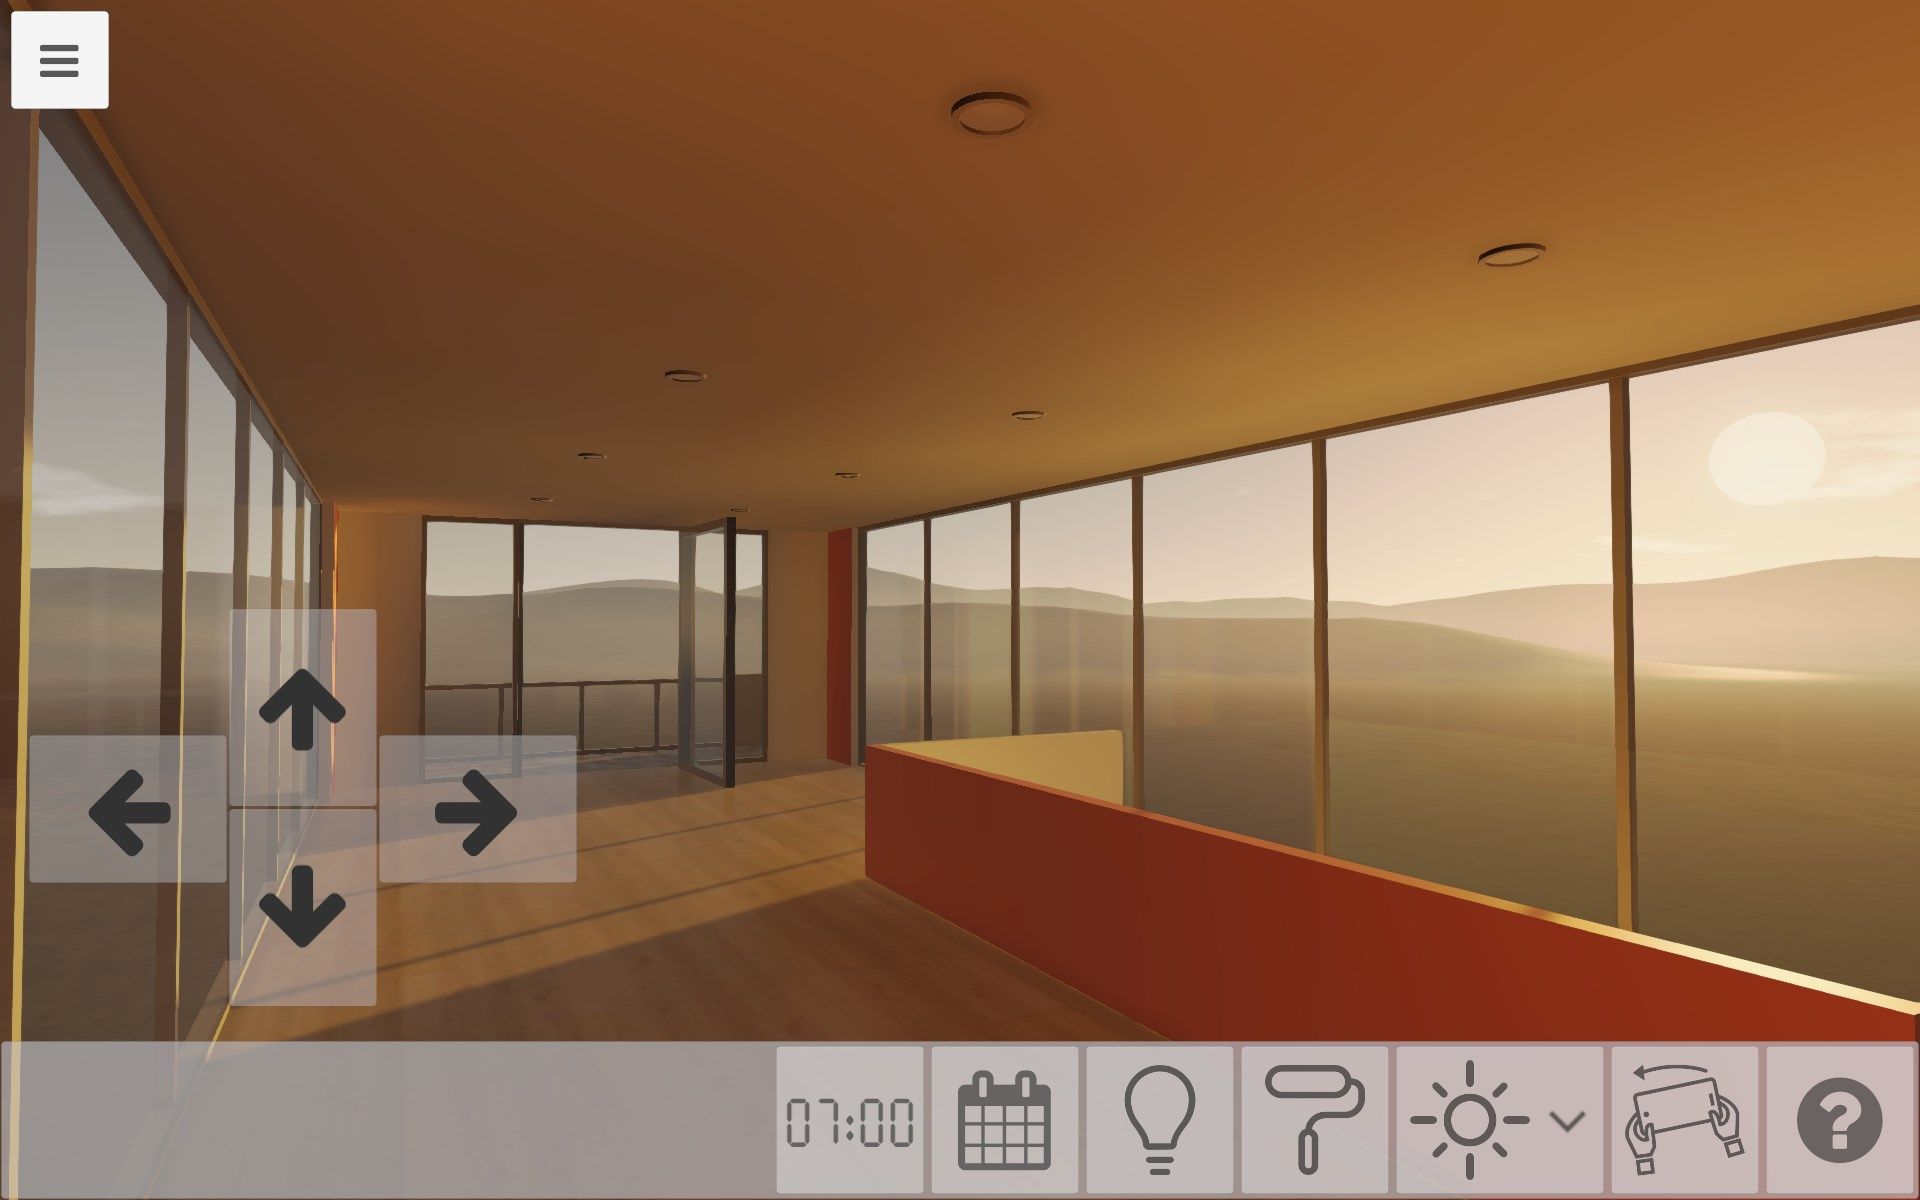 Walk around and explore the house using the device gyro, touch controls or mouse and keyboard.